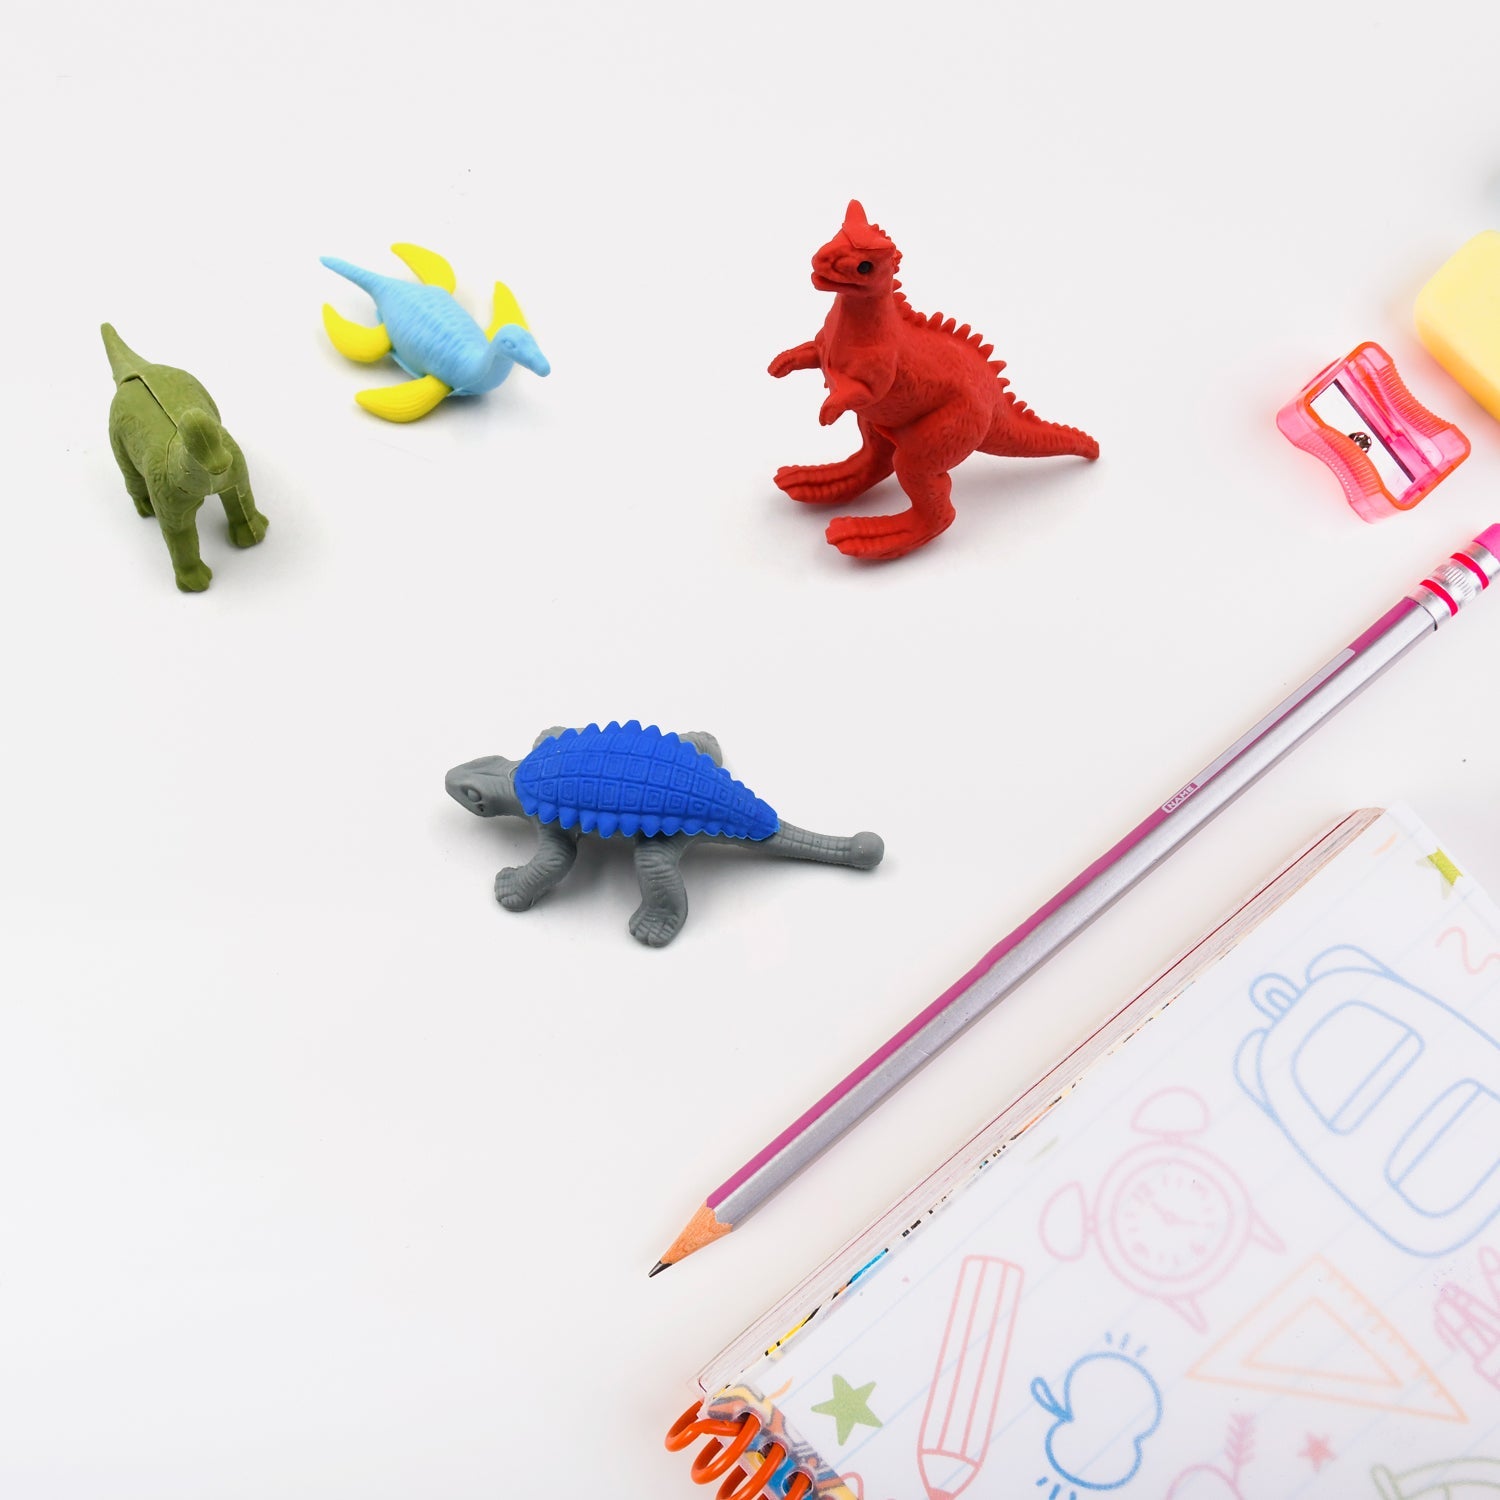 Small Dinosaur Shaped Erasers Animal Erasers for Kids, Dinosaur Erasers Puzzle 3D Eraser, Desk Pets for Students Classroom Prizes Class Rewards Party Favors for Toddlers, Soft Non-Dust Stationery Activity Toy, for School Supplies (4 Pc Set)